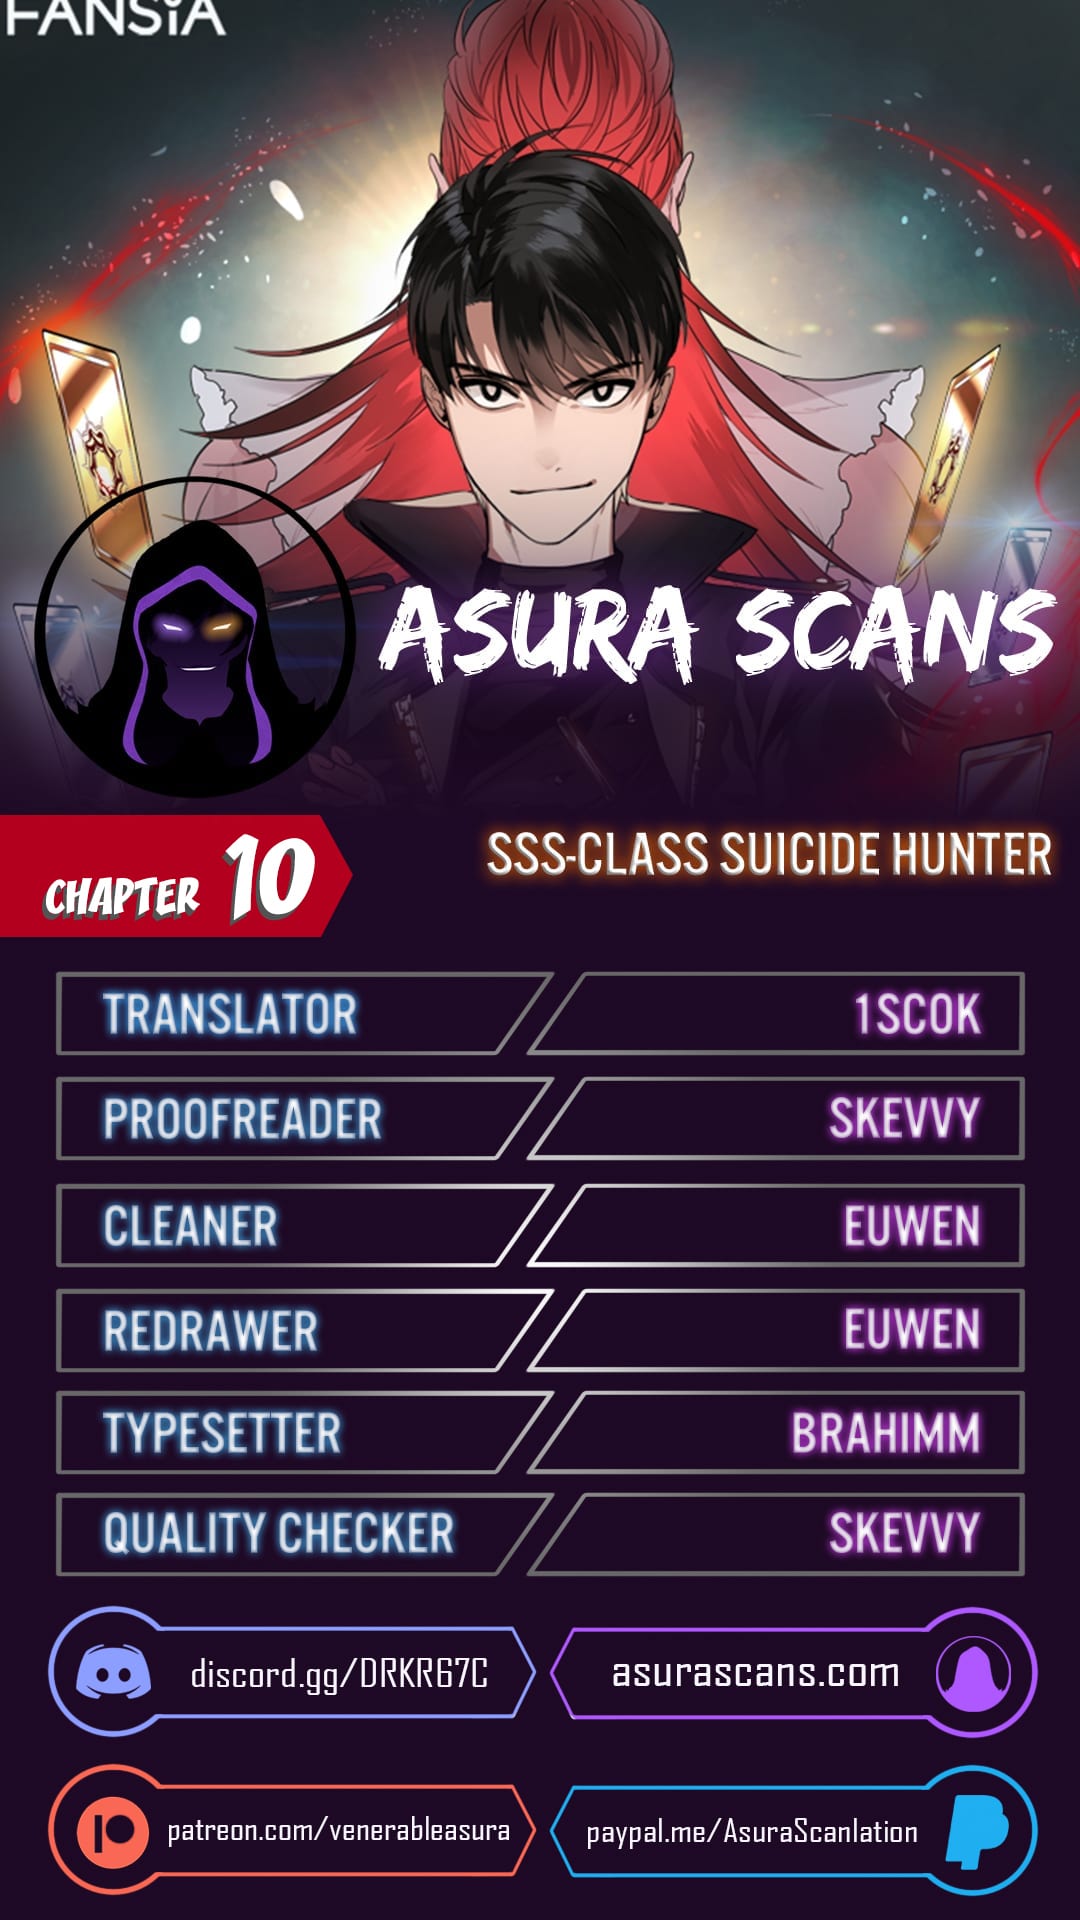 SSS-Class Suicide Hunter chapter 10